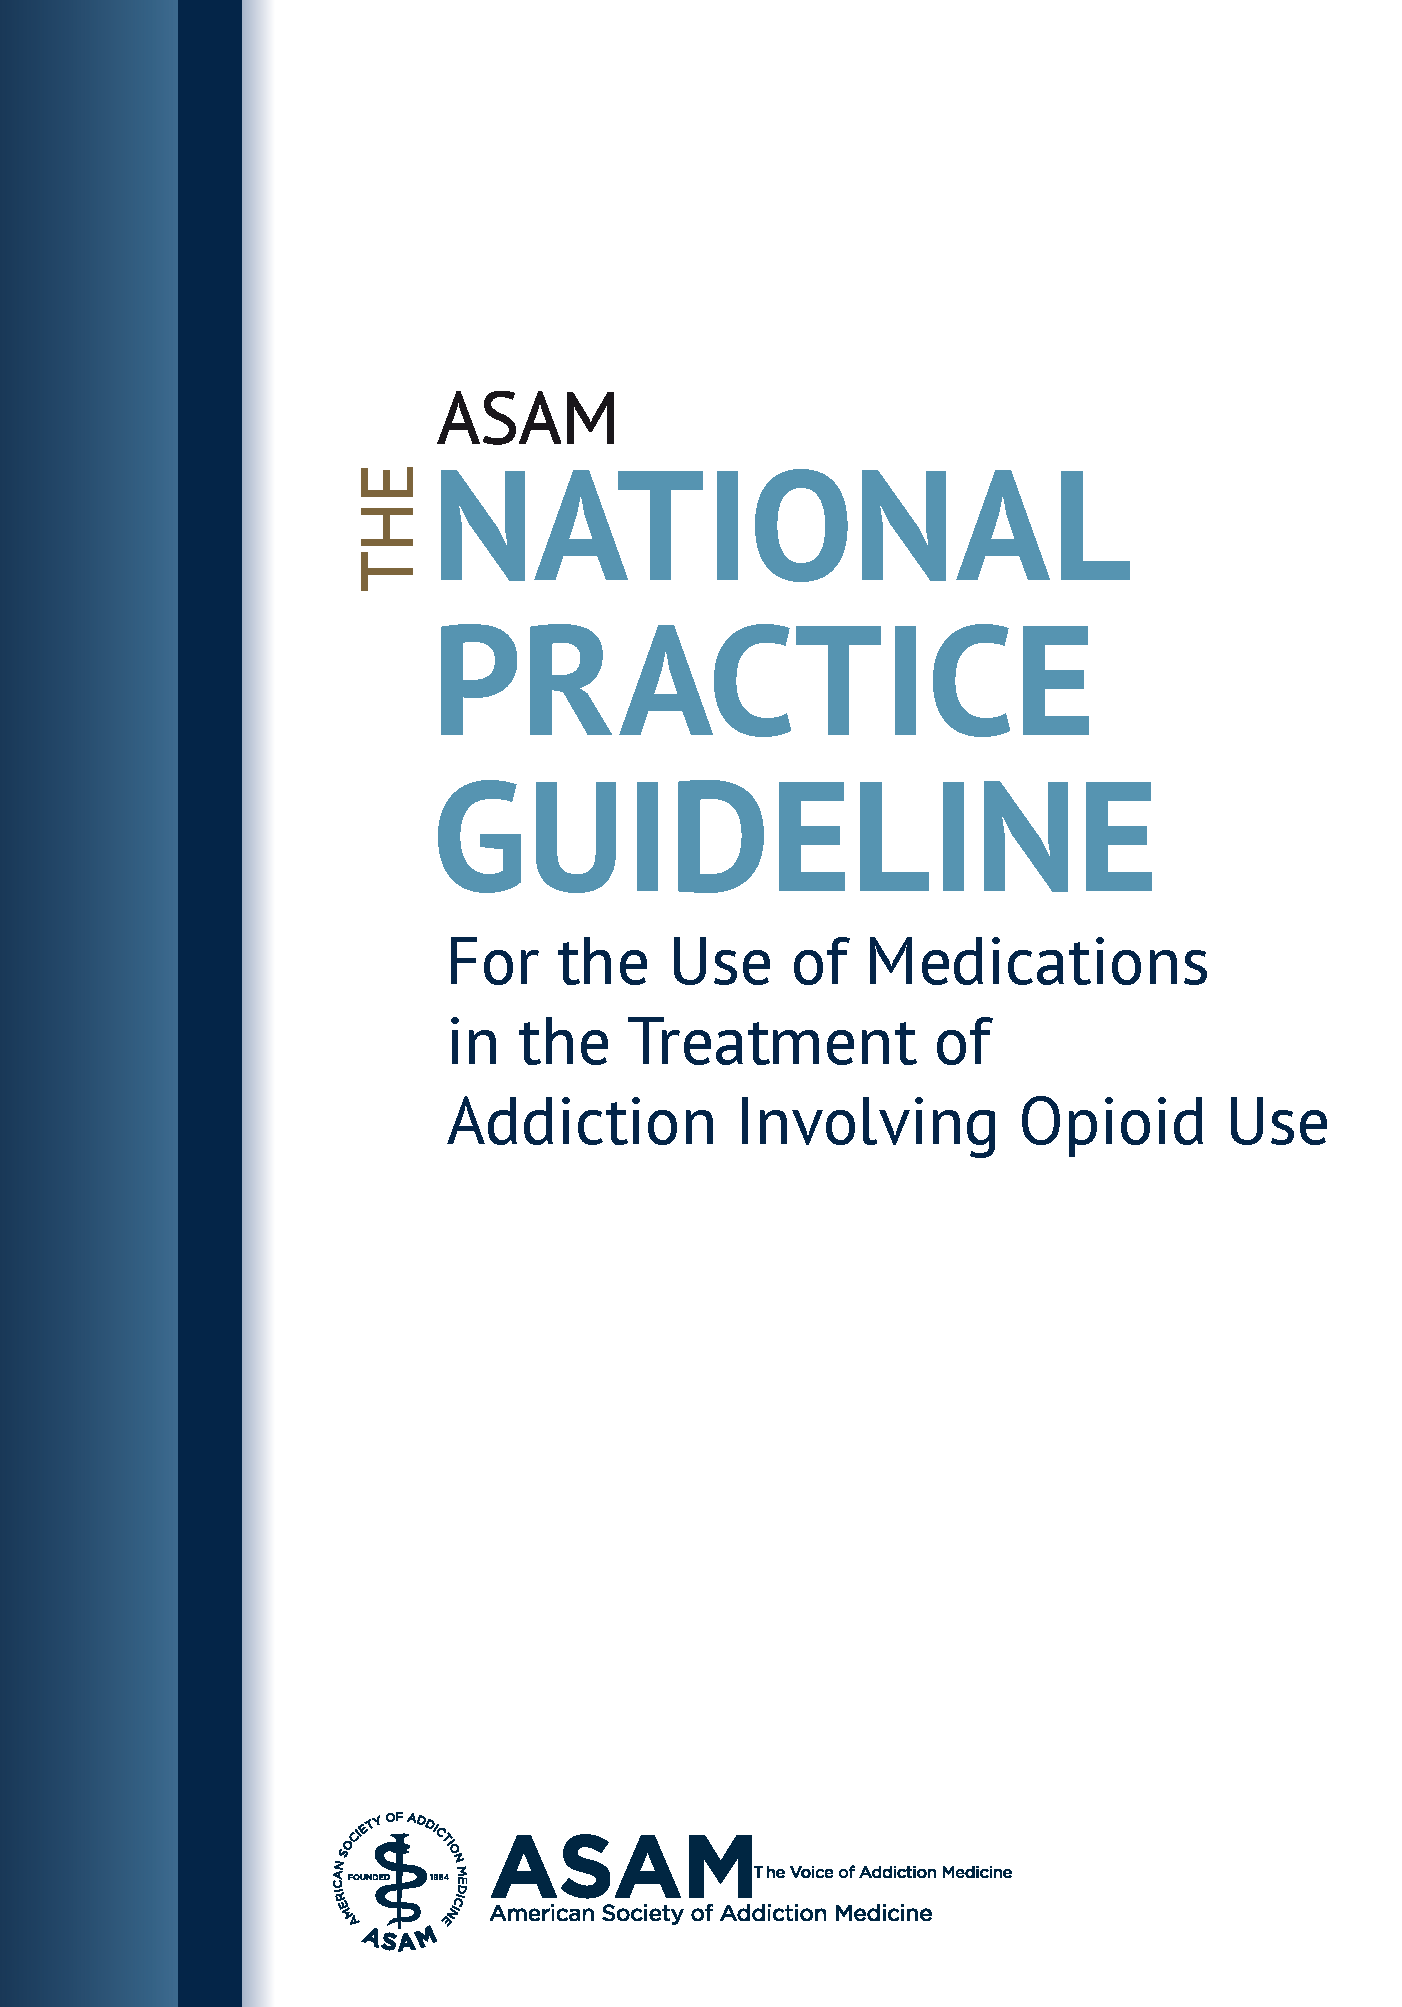 Guidelines cover: click to download full guideline